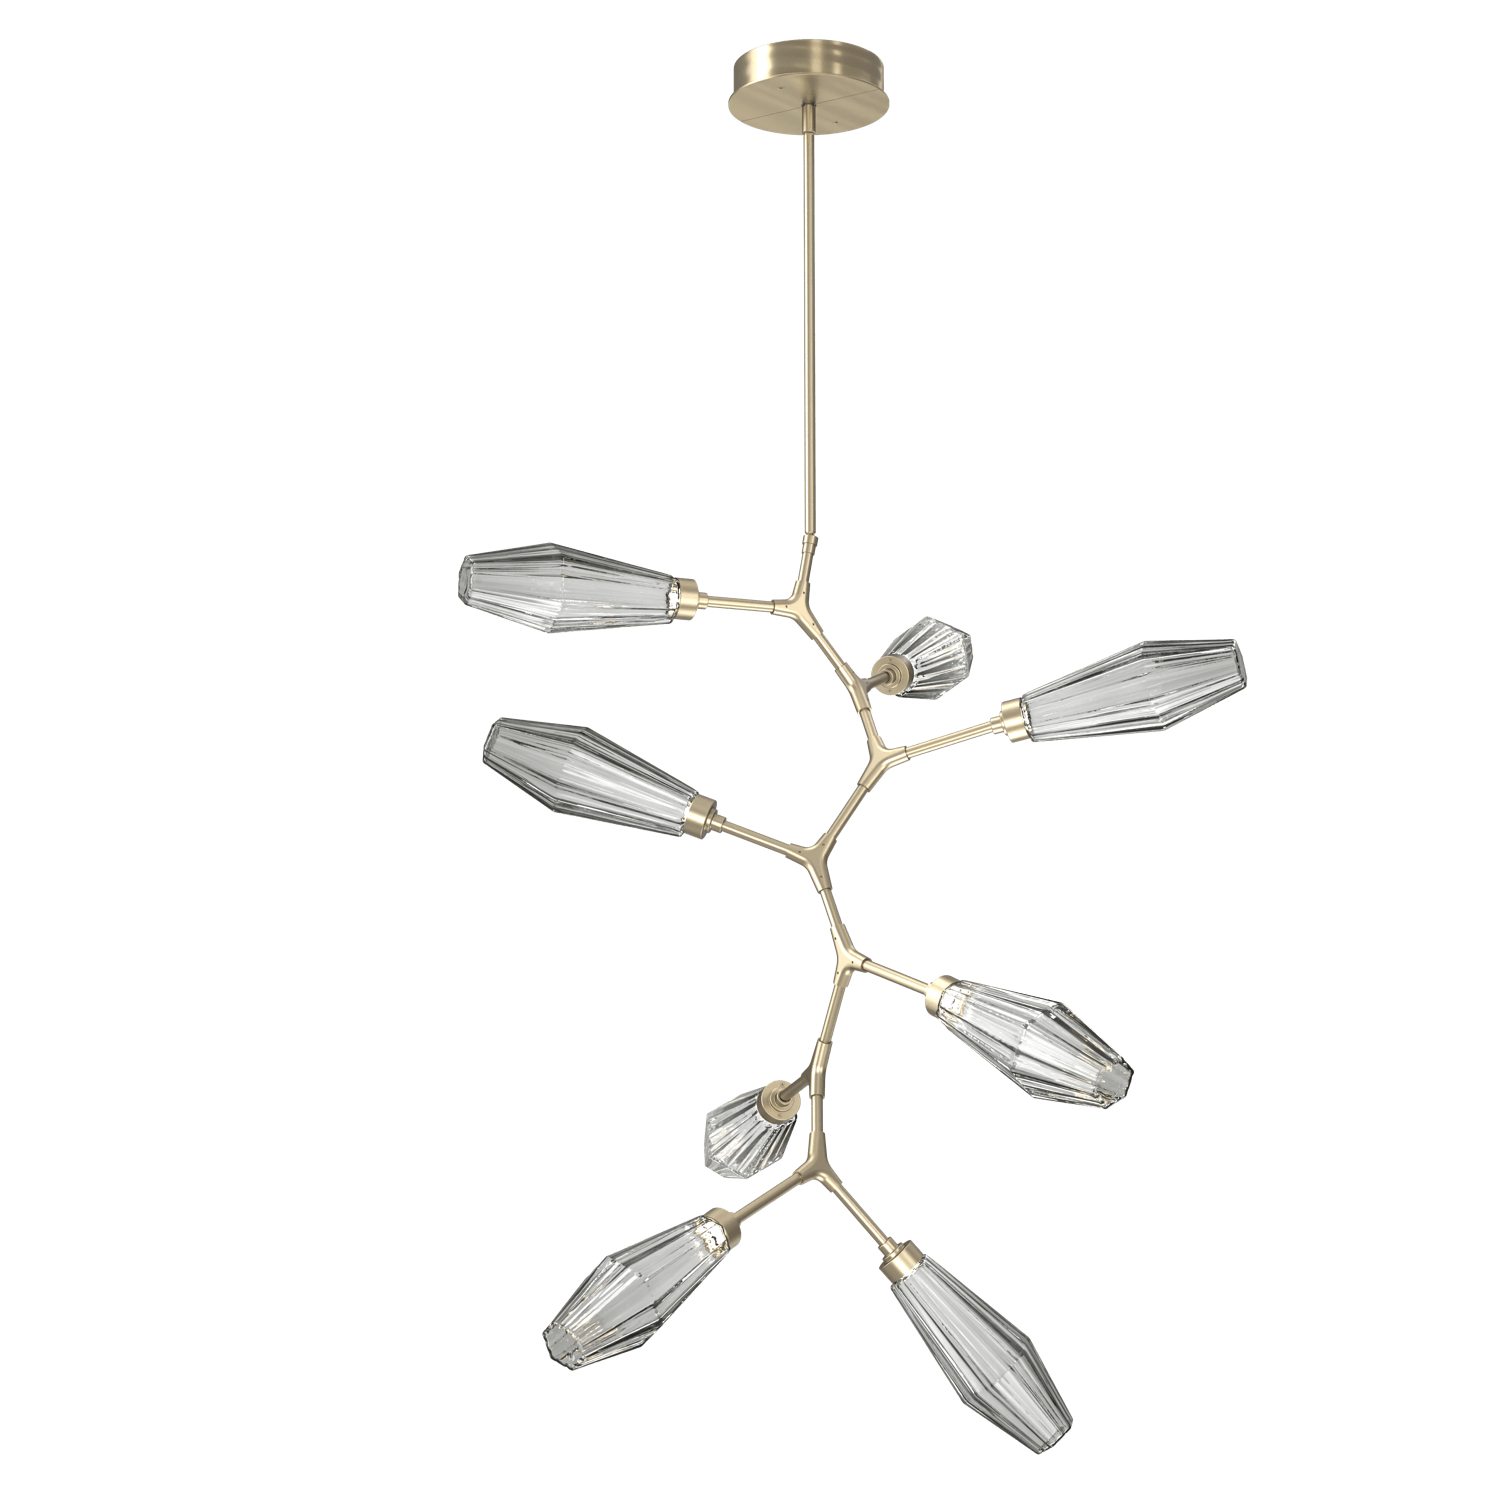 CHB0049-VB-HB-RS-Hammerton-Studio-Aalto-8-light-modern-vine-chandelier-with-heritage-brass-finish-and-optic-ribbed-smoke-glass-shades-and-LED-lamping